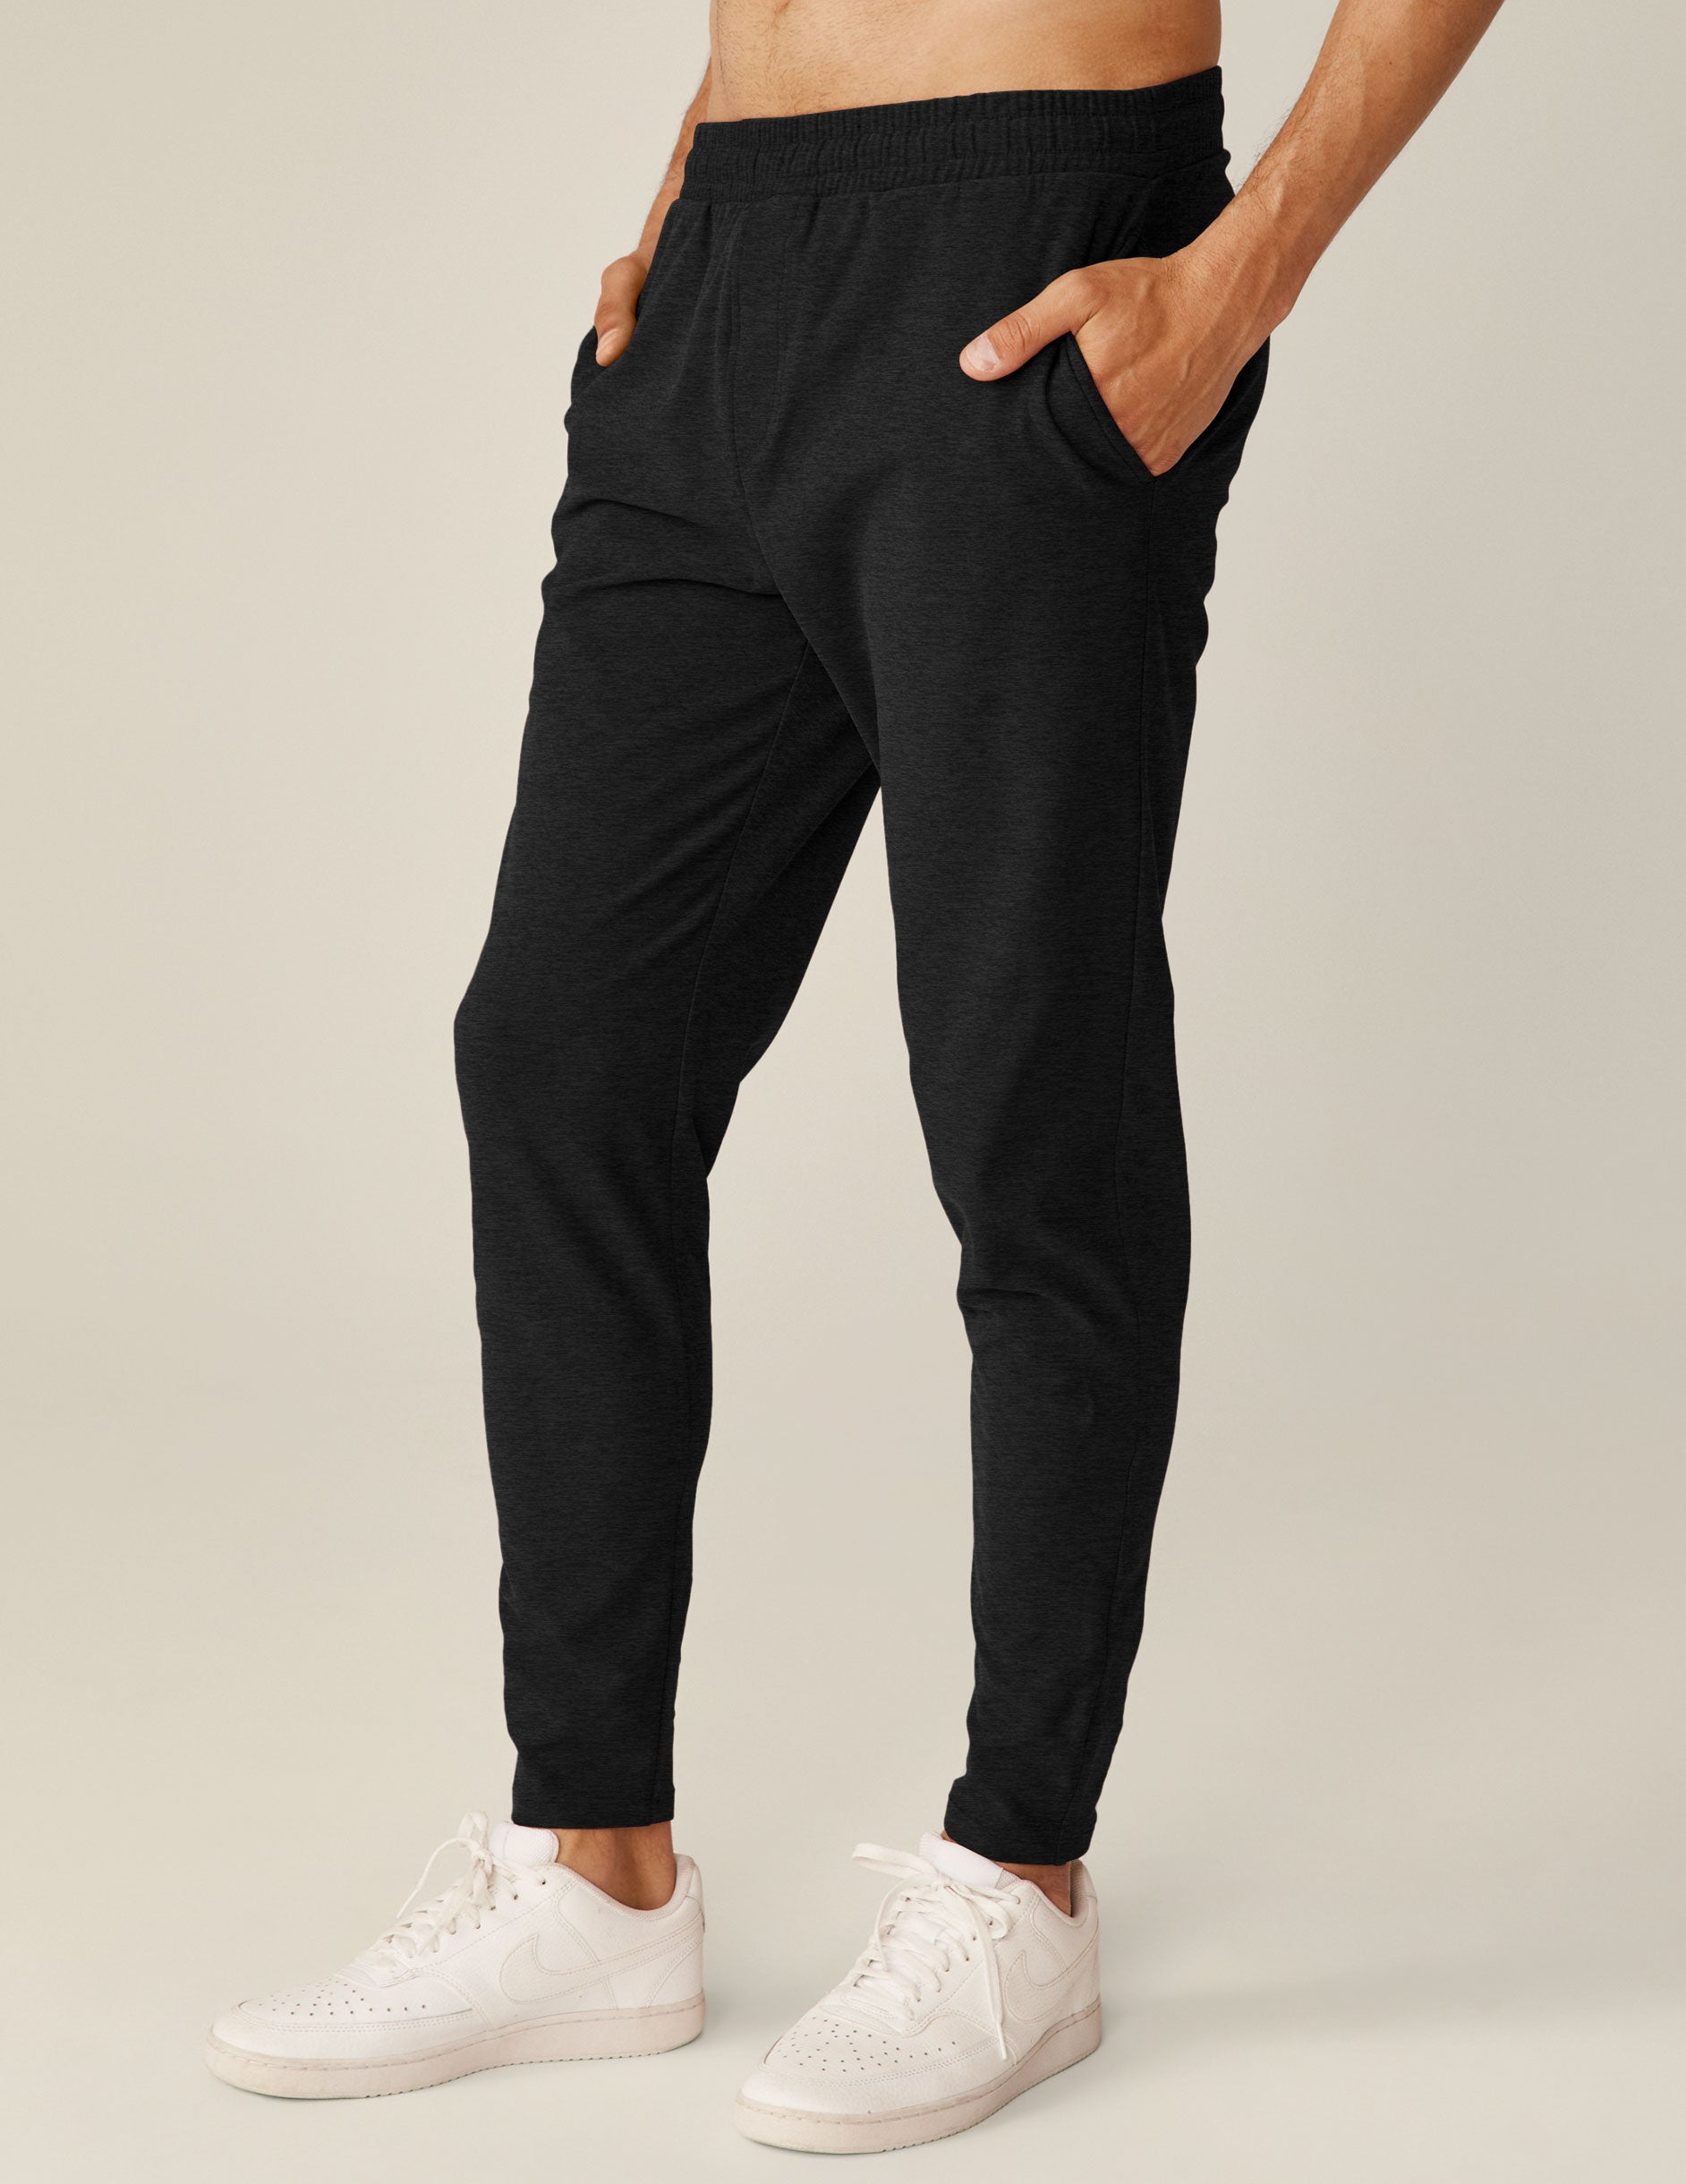 black men's athleisure pants with an internal drawcord and pockets. 